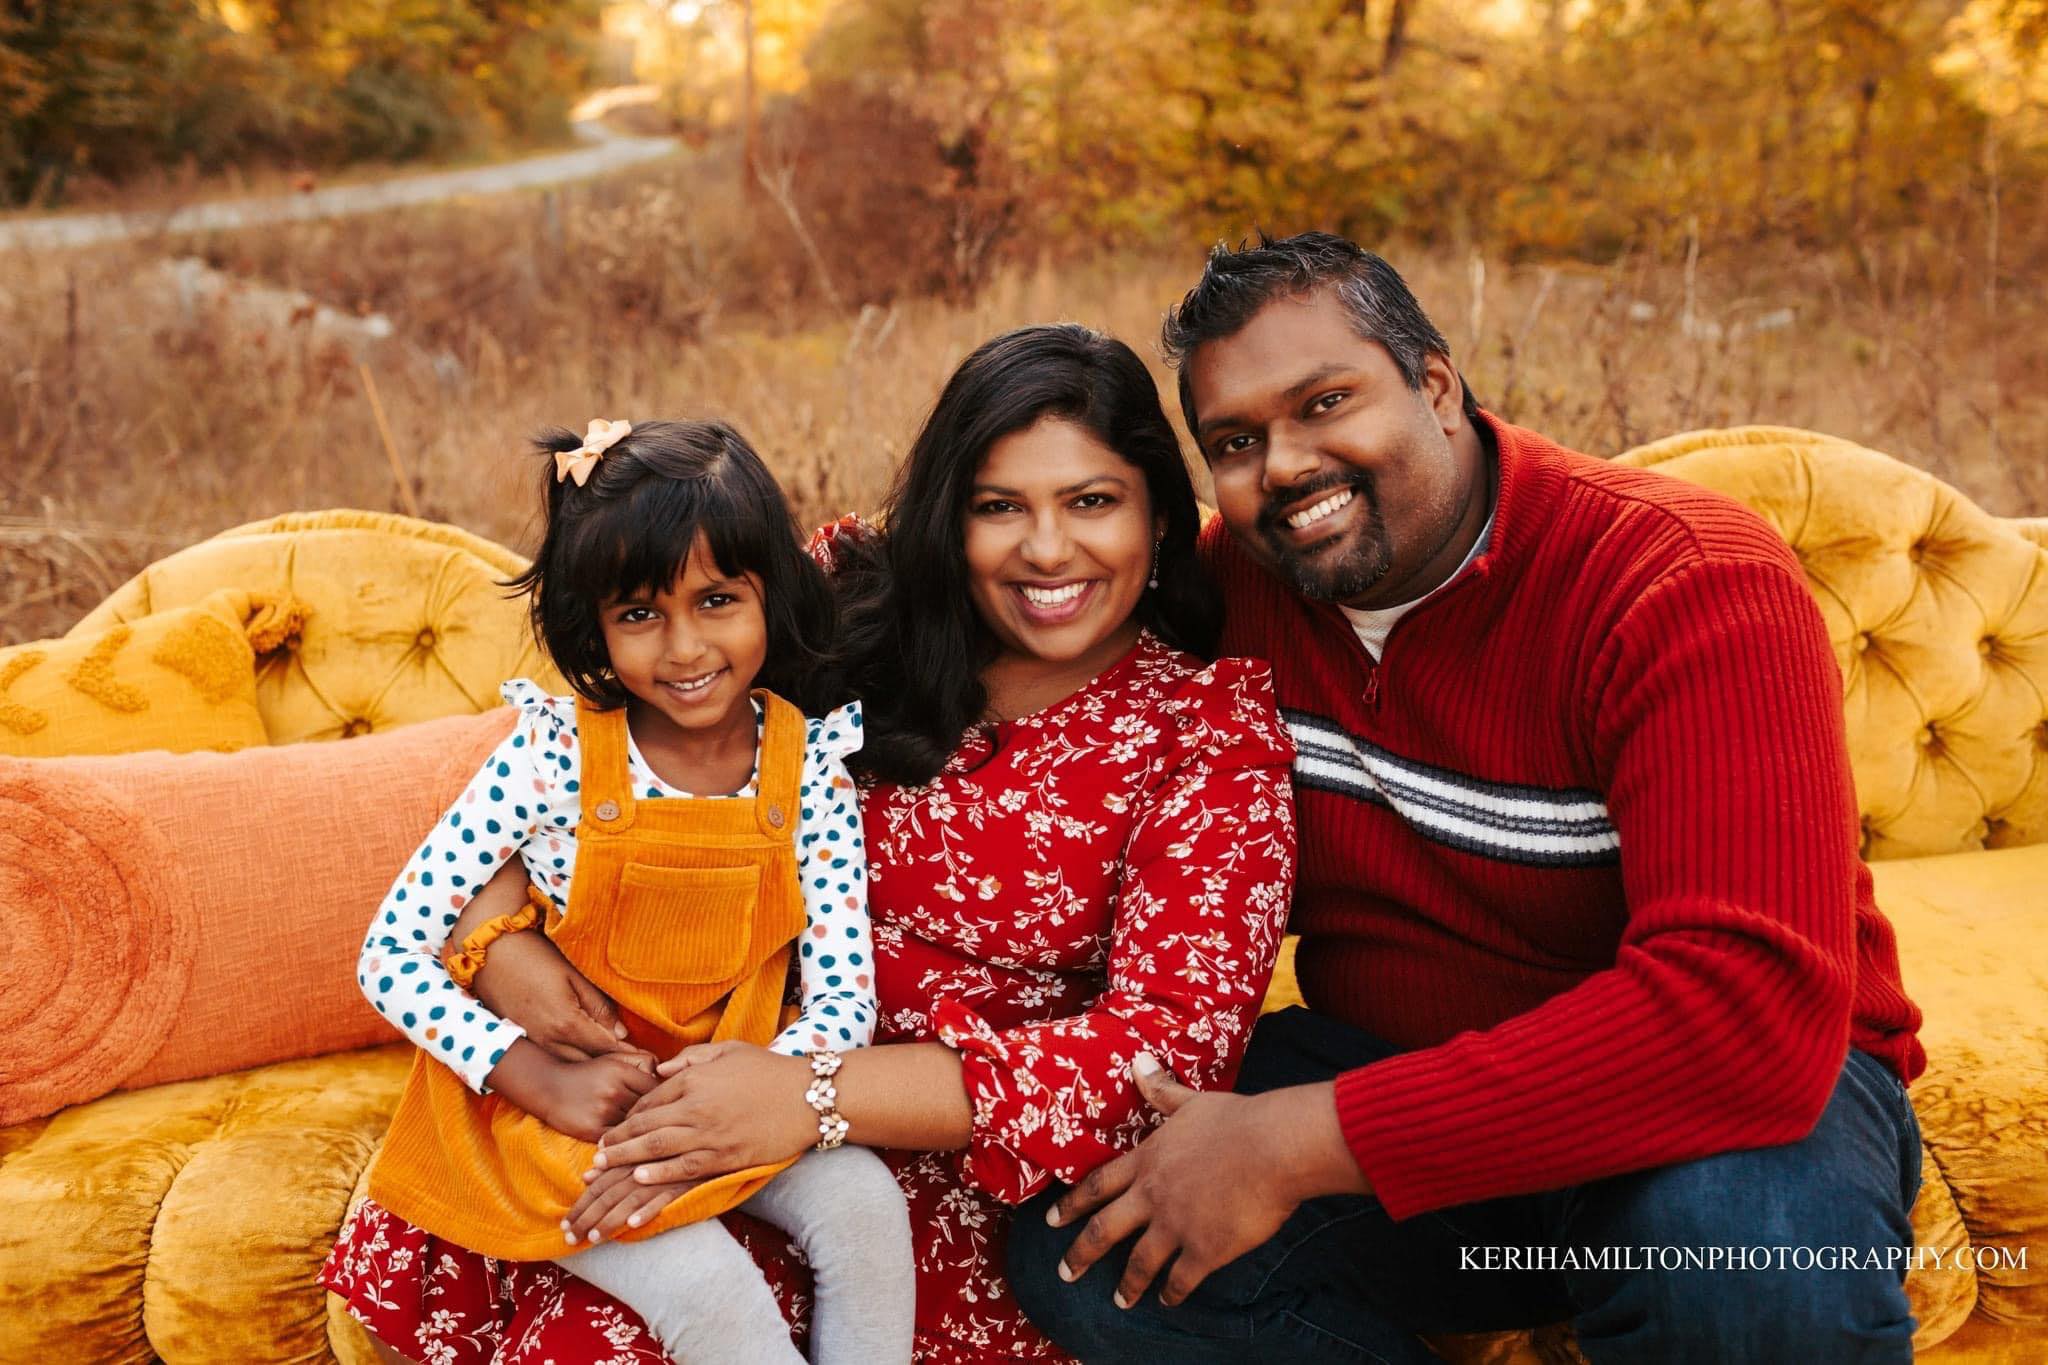 Harshi Perera smiles alongside her husband and daughter